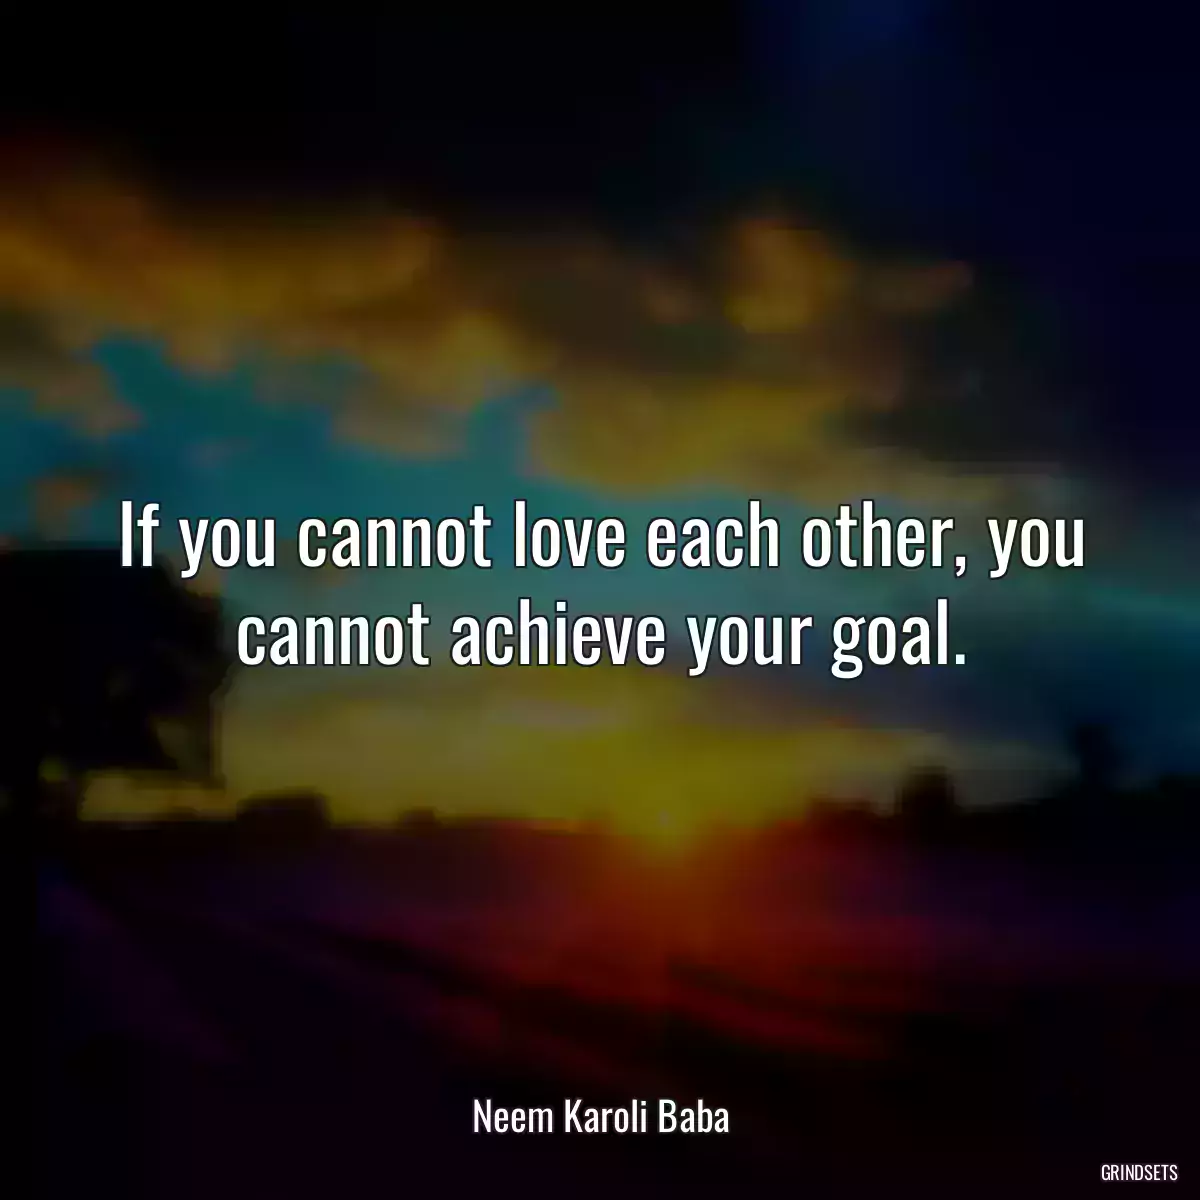 If you cannot love each other, you cannot achieve your goal.